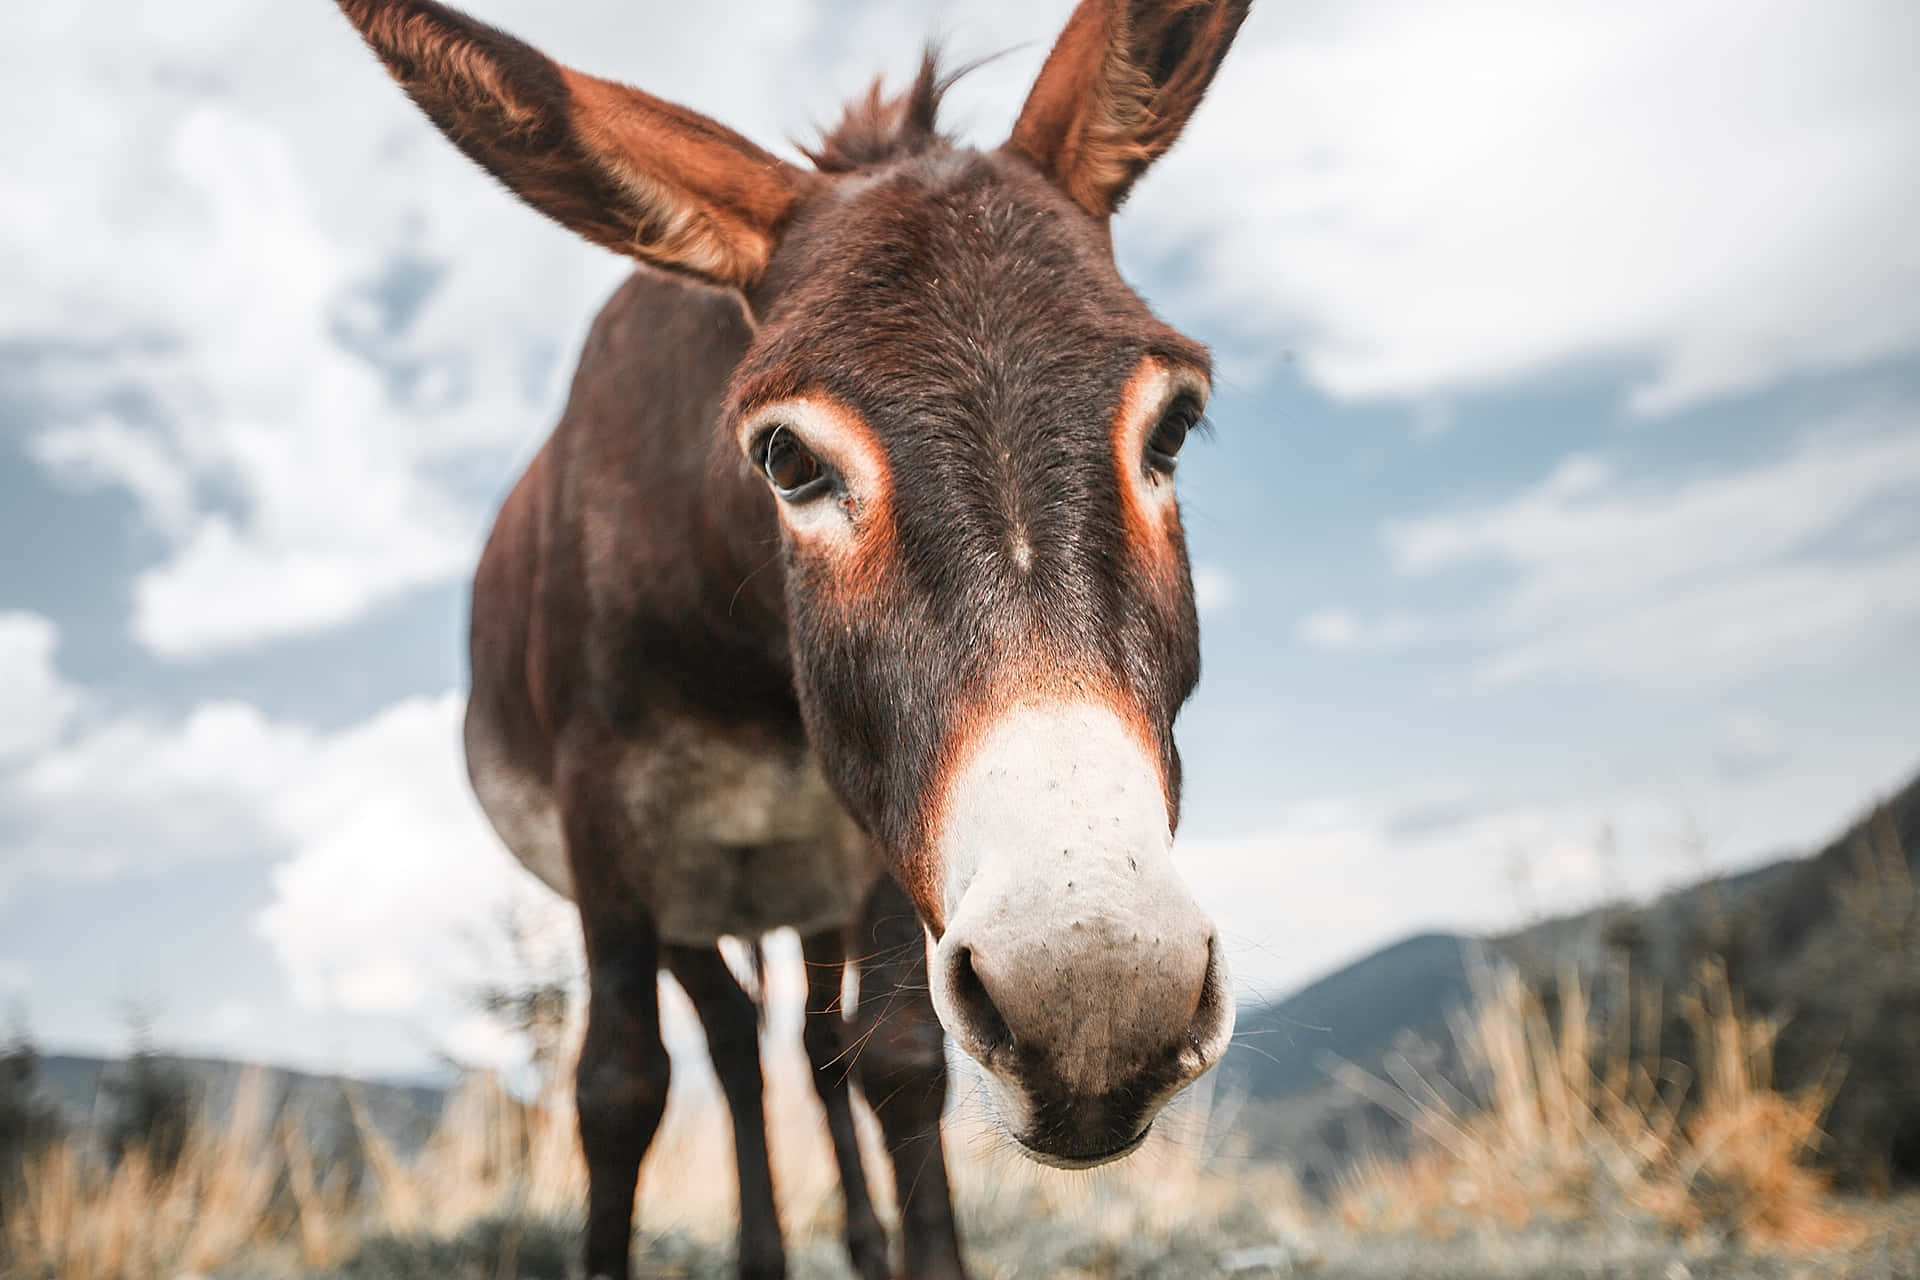 Donkey Pictures